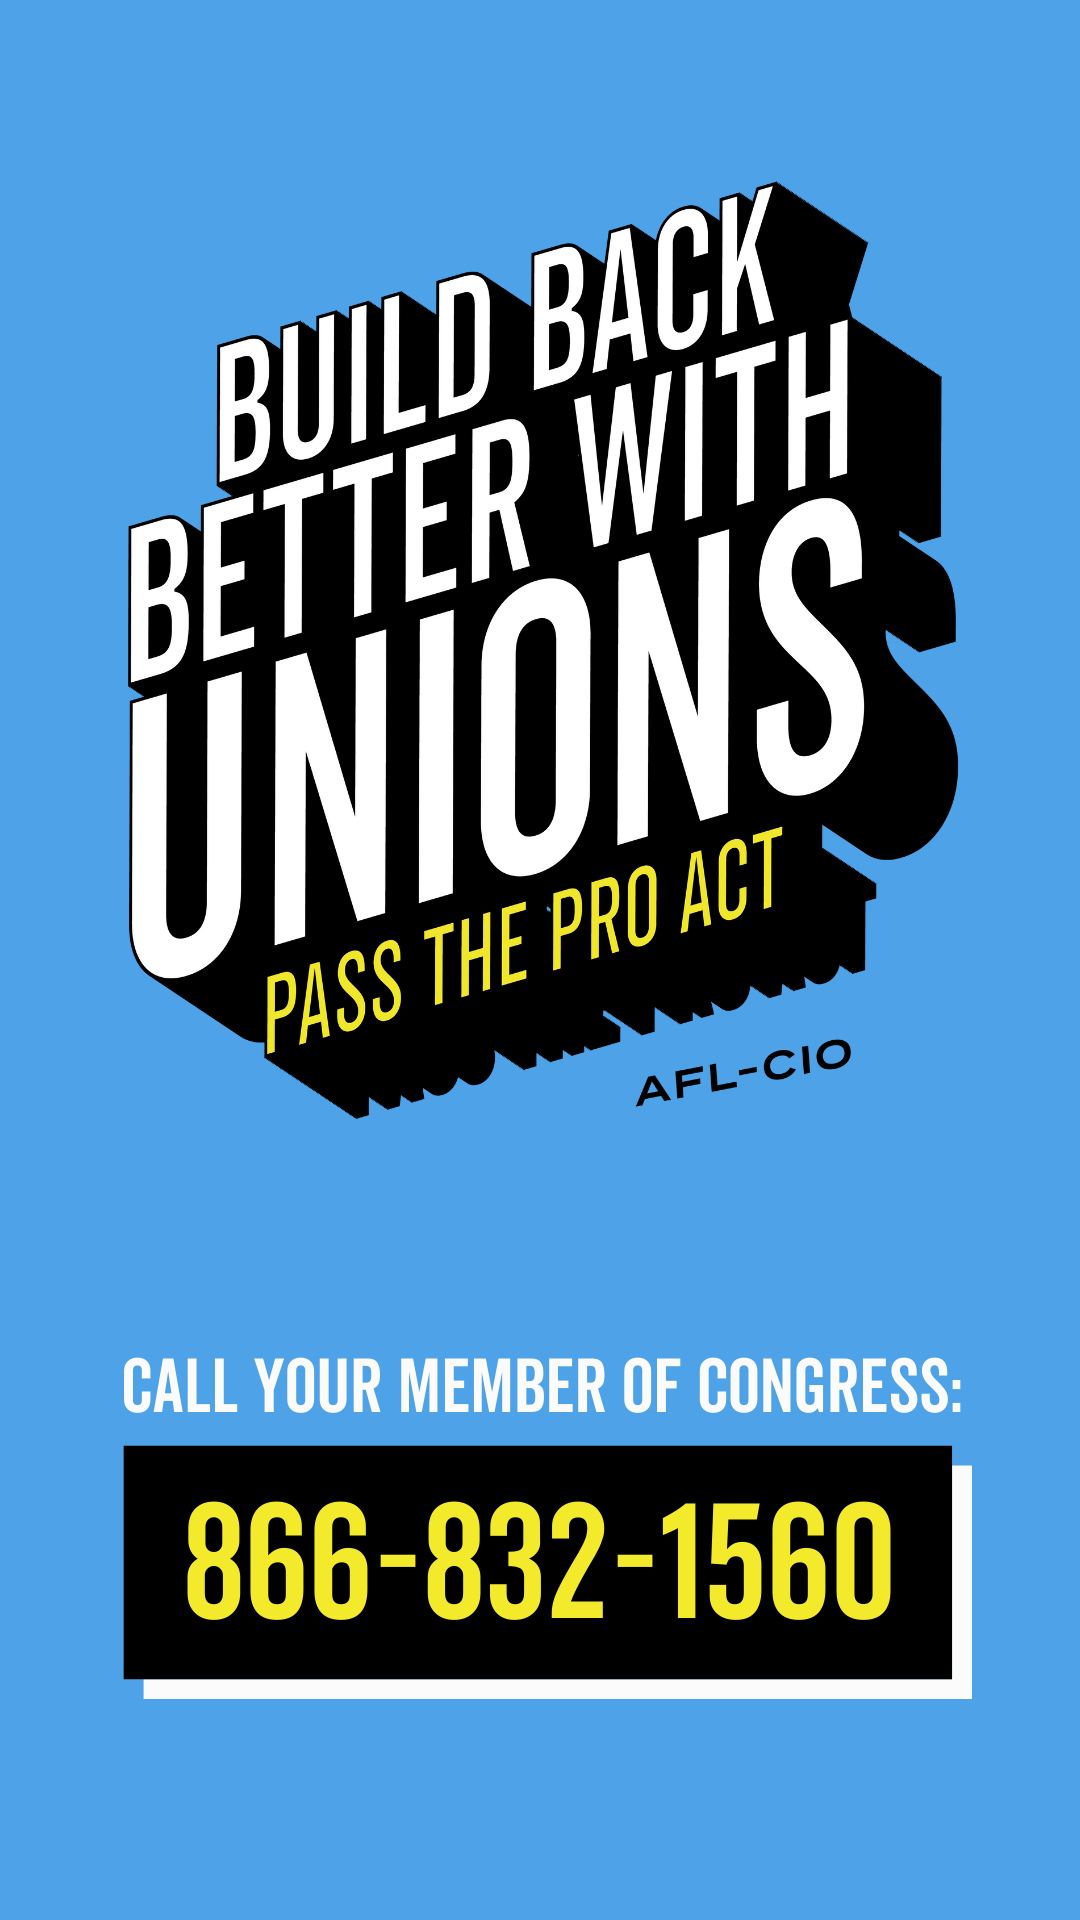 Build Back Better with Unions. Pass the Pro Act. Call Your Member of Congress 866-832-1560